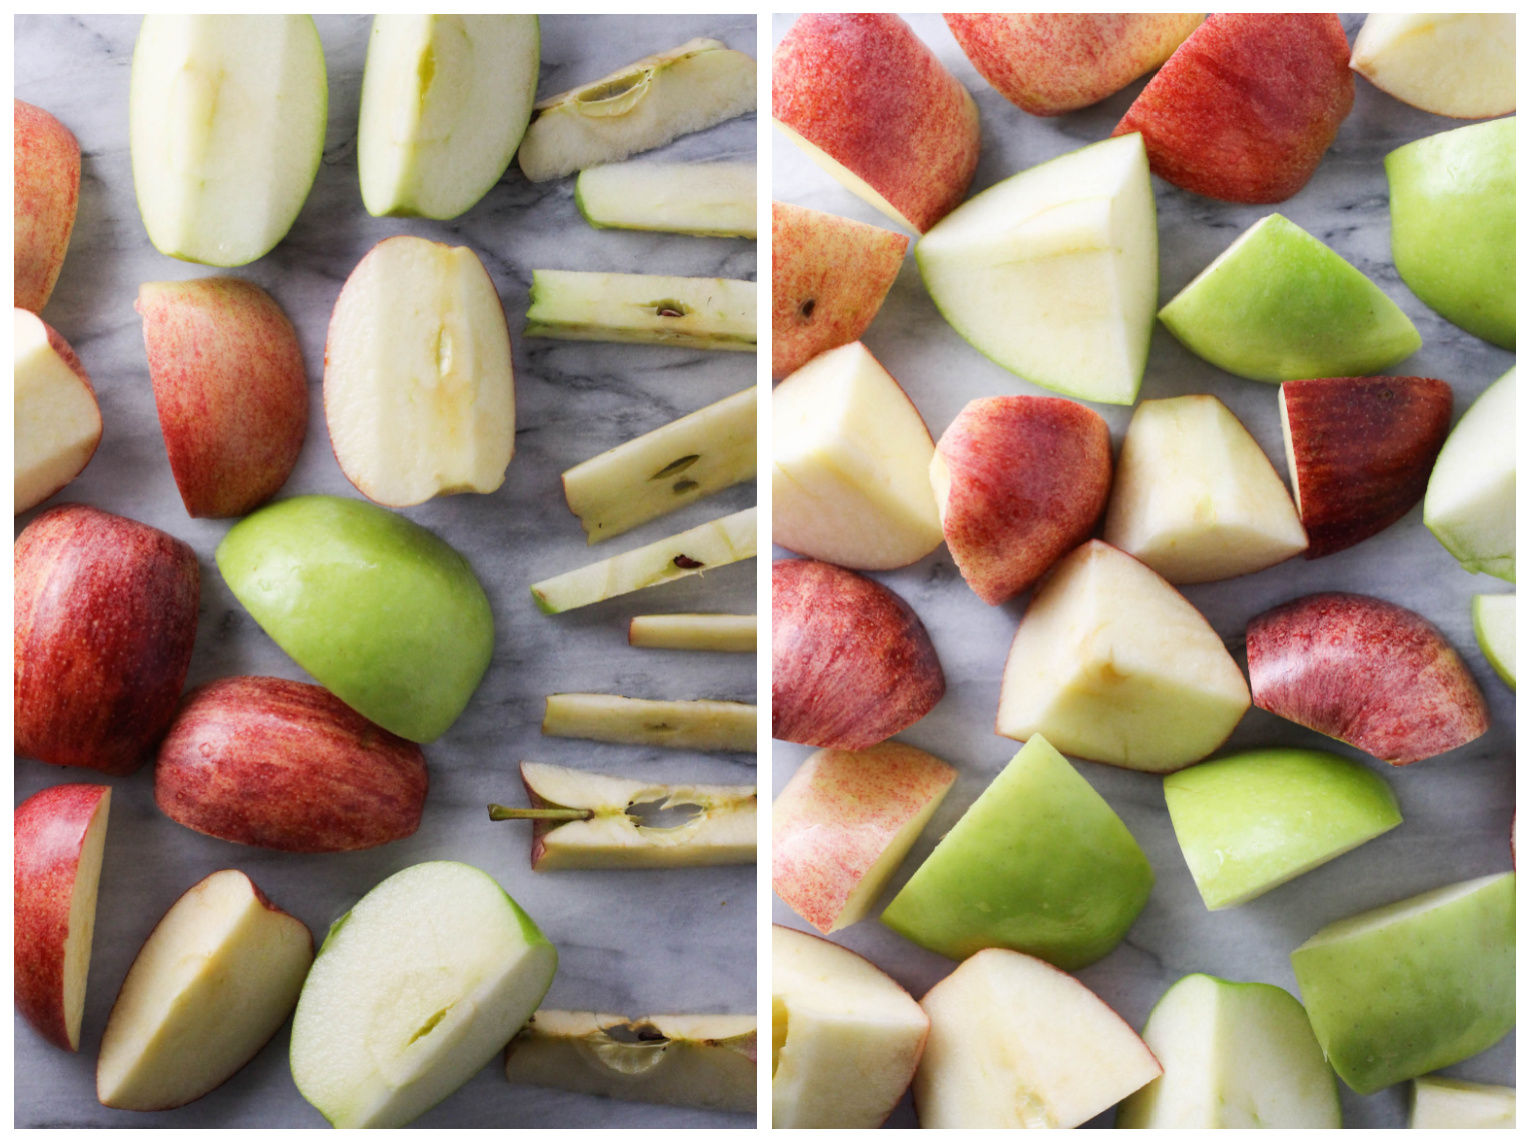 Collage of two images side-by-side. On the left, image or apple pices and apple cores. On the right, image of apple chunks.